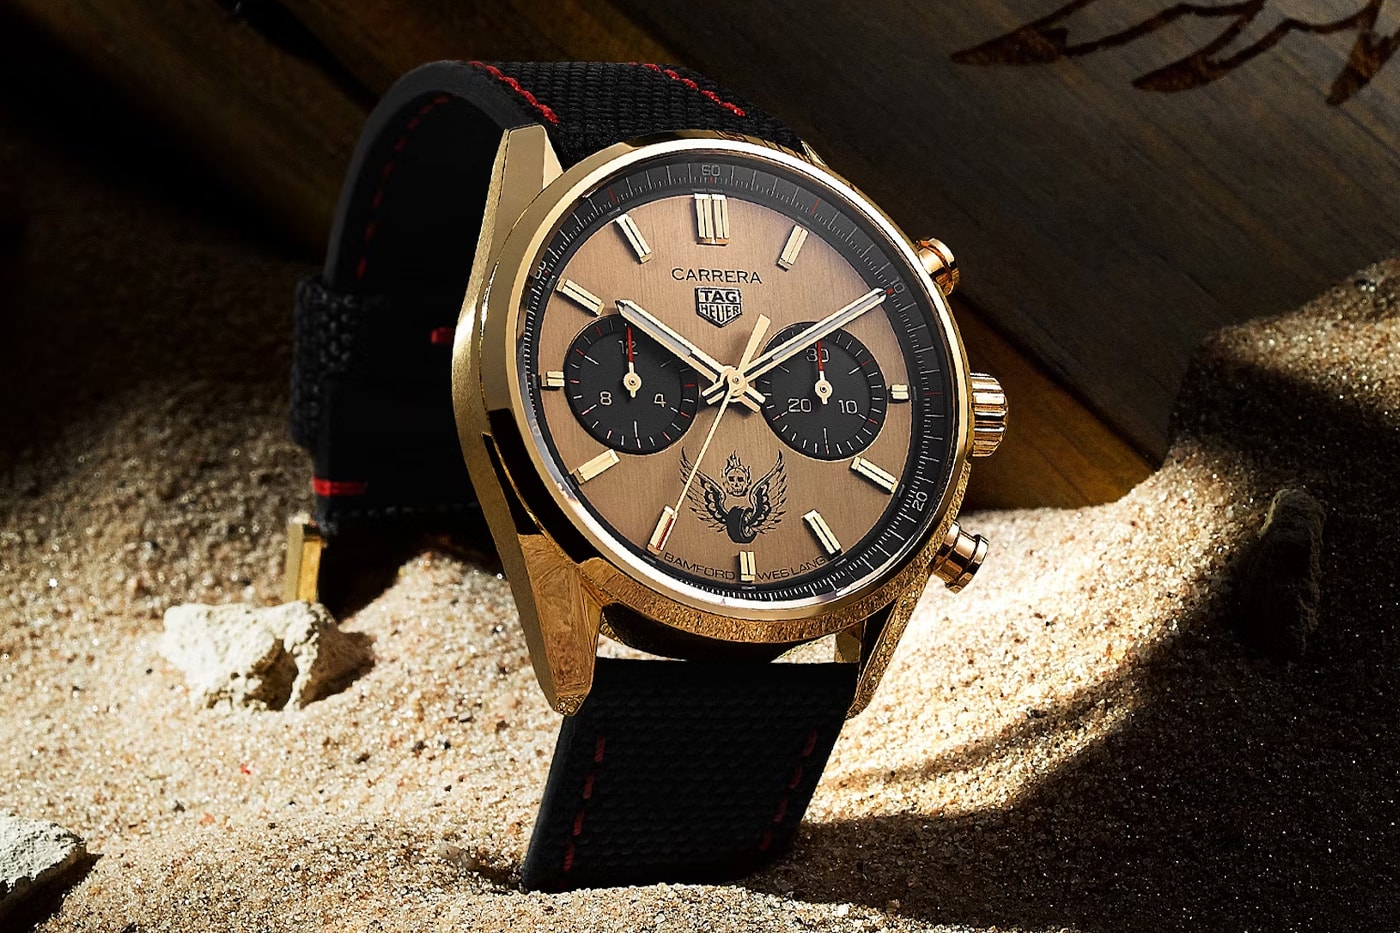  Bamford Watch Department Wes Lang TAG Heuer Carrera 18K Gold Release Info